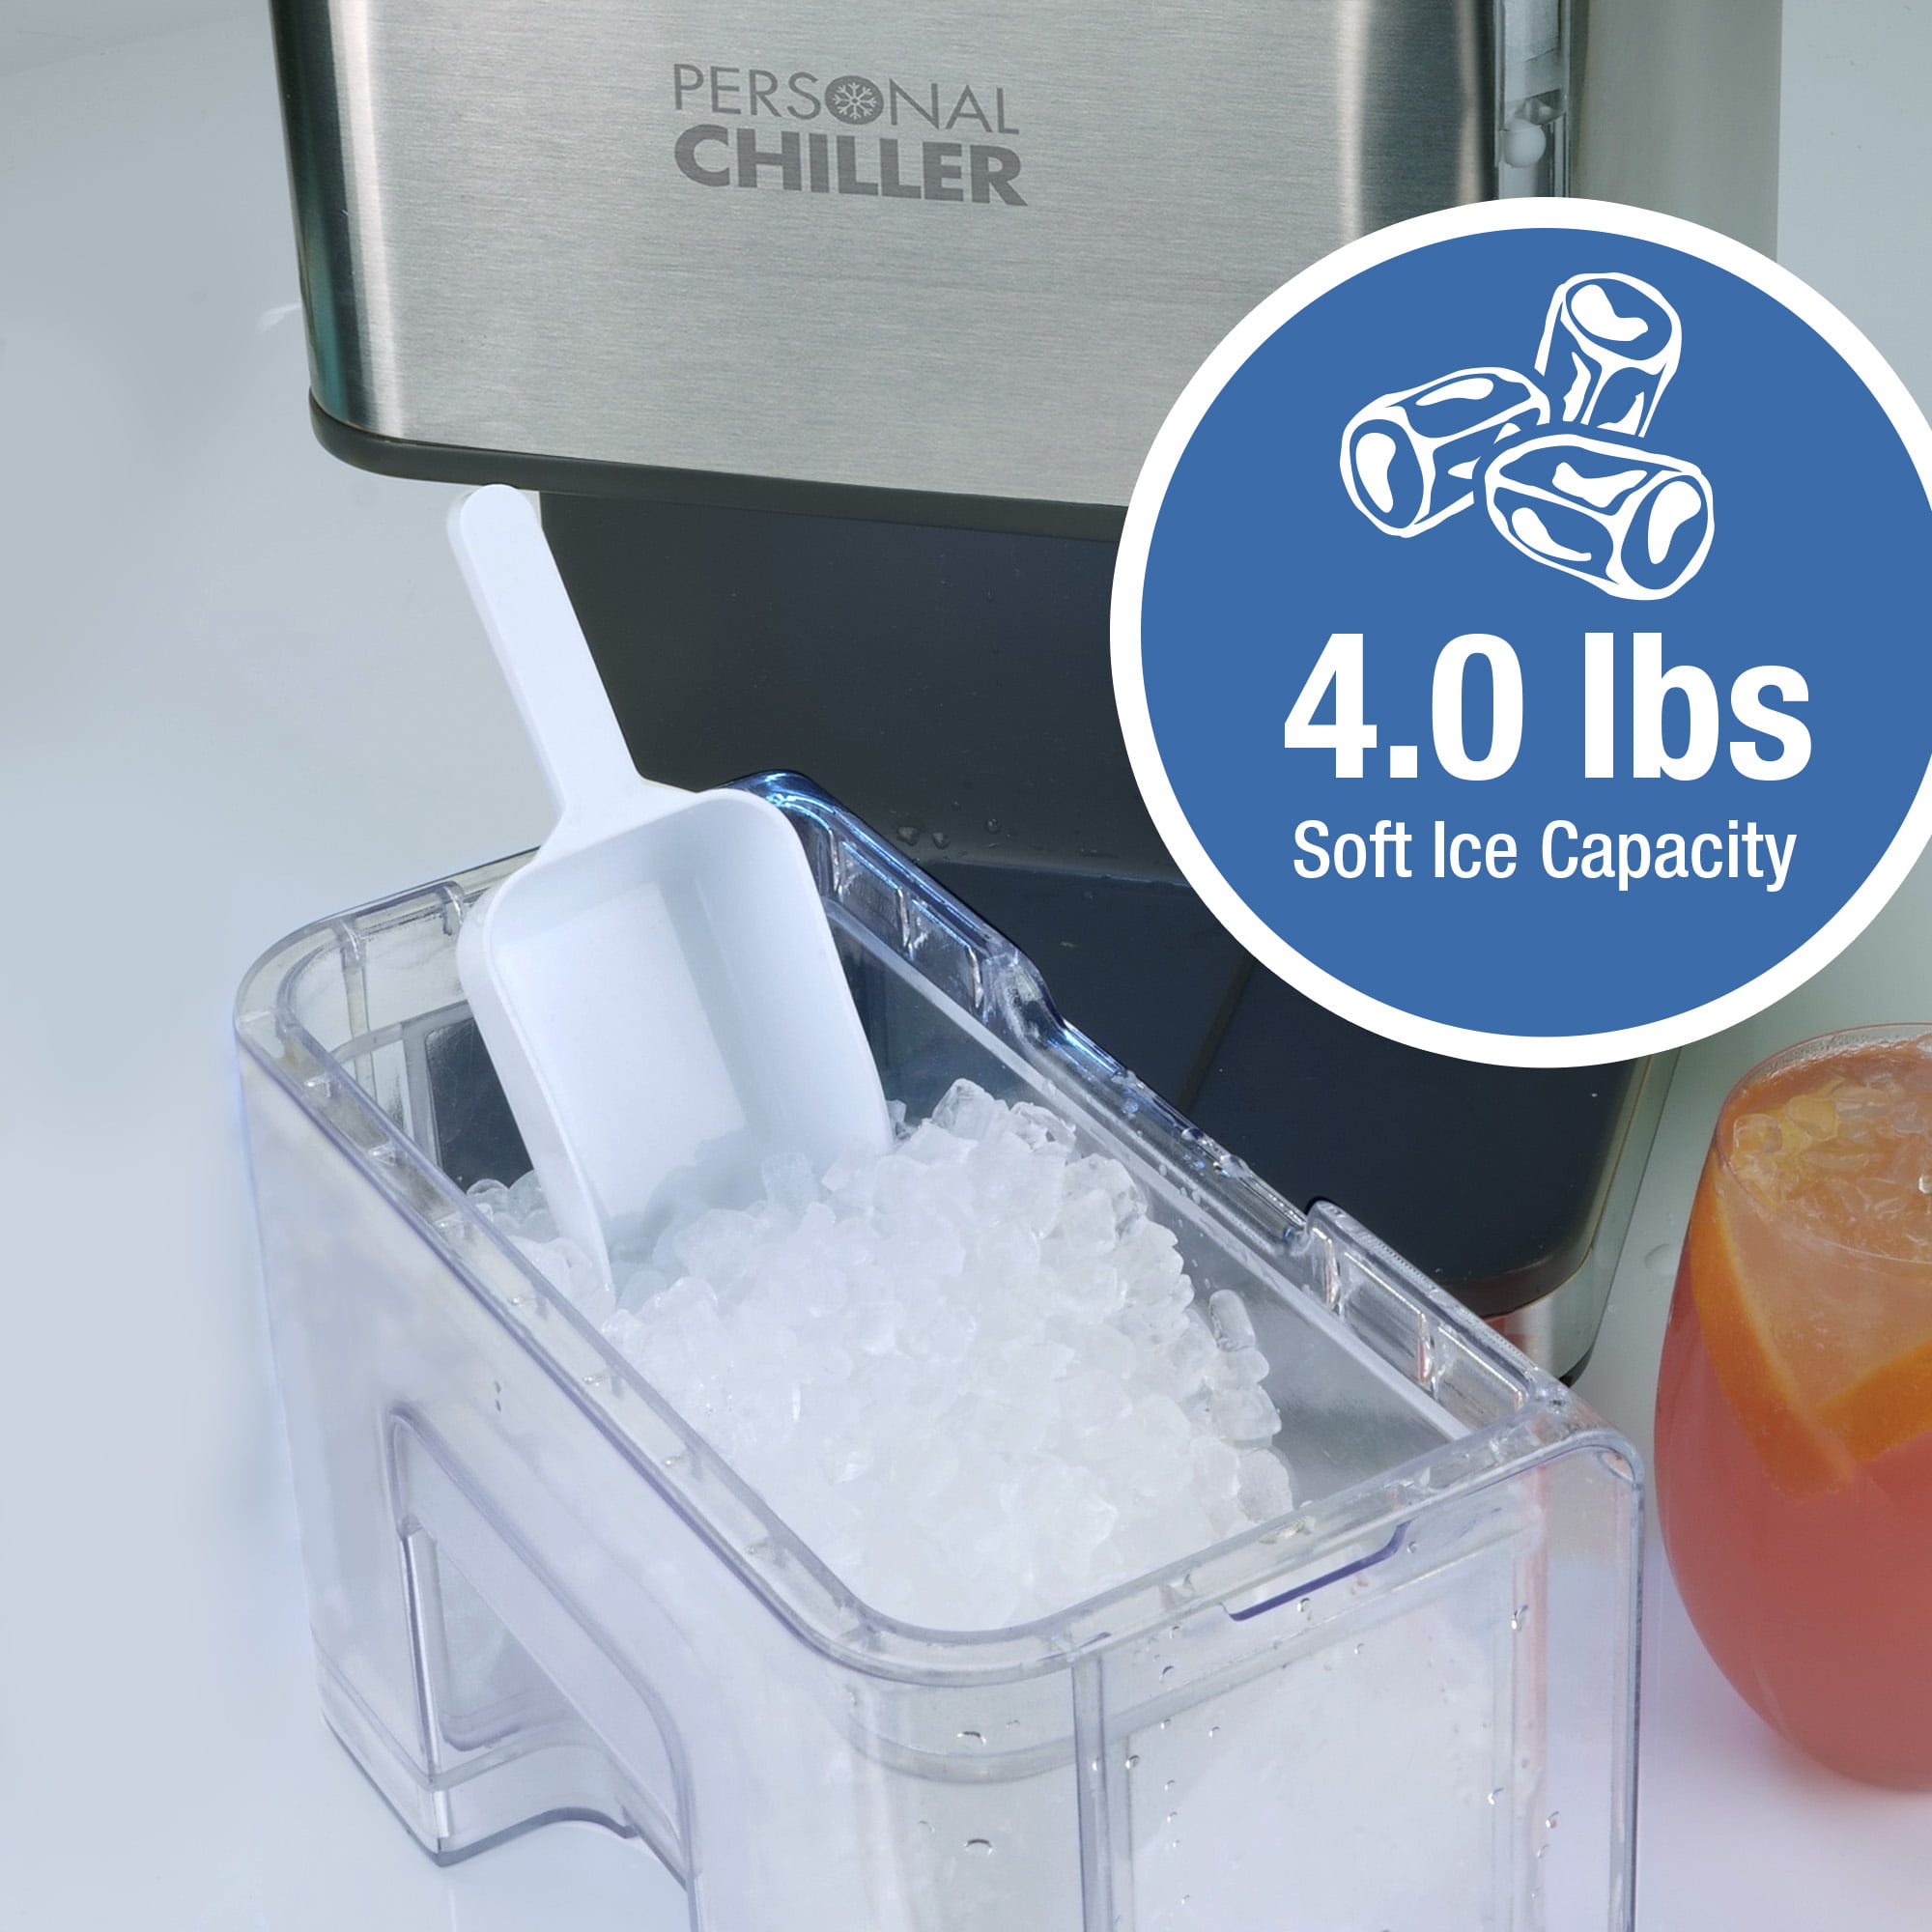 Personal Chiller Portable Countertop Ice Maker for Soft Nugget Ice at Home